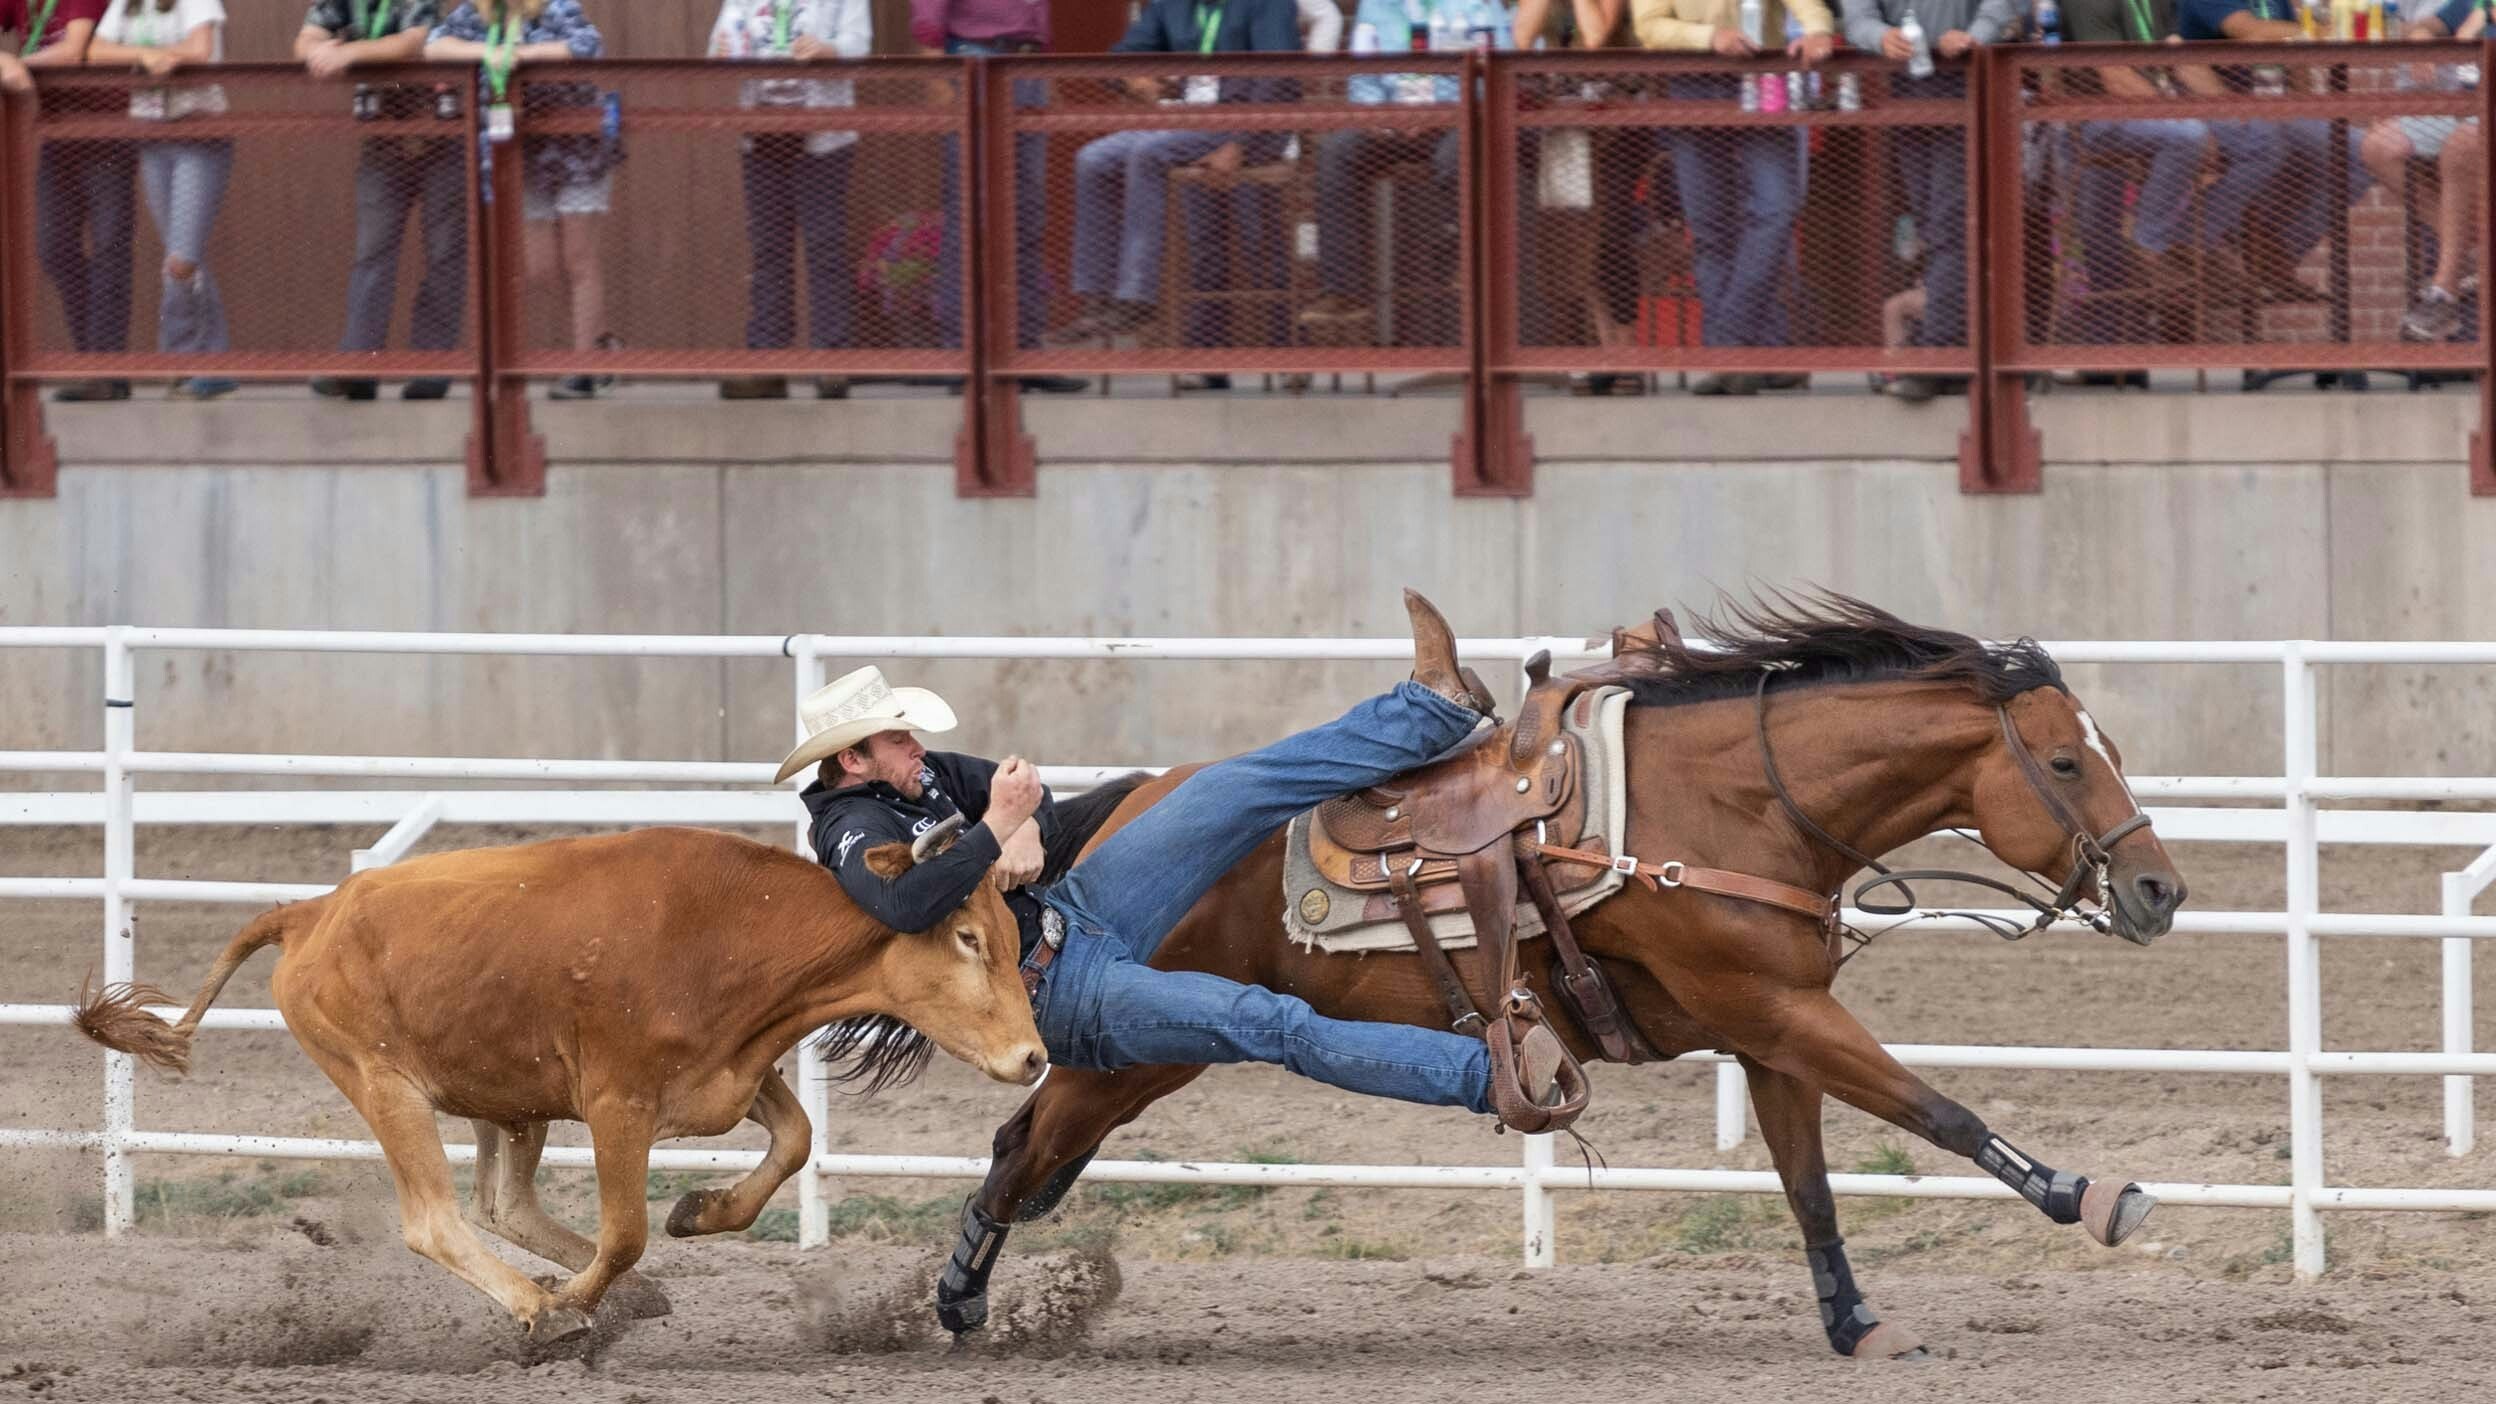 Walt Arnold wrestles his steer in the Steer Wrestling on Championship Sunday at Cheyenne Frontier Days on July 30, 2023. Walt had a time of 6.7 to place 3rd in the final round.